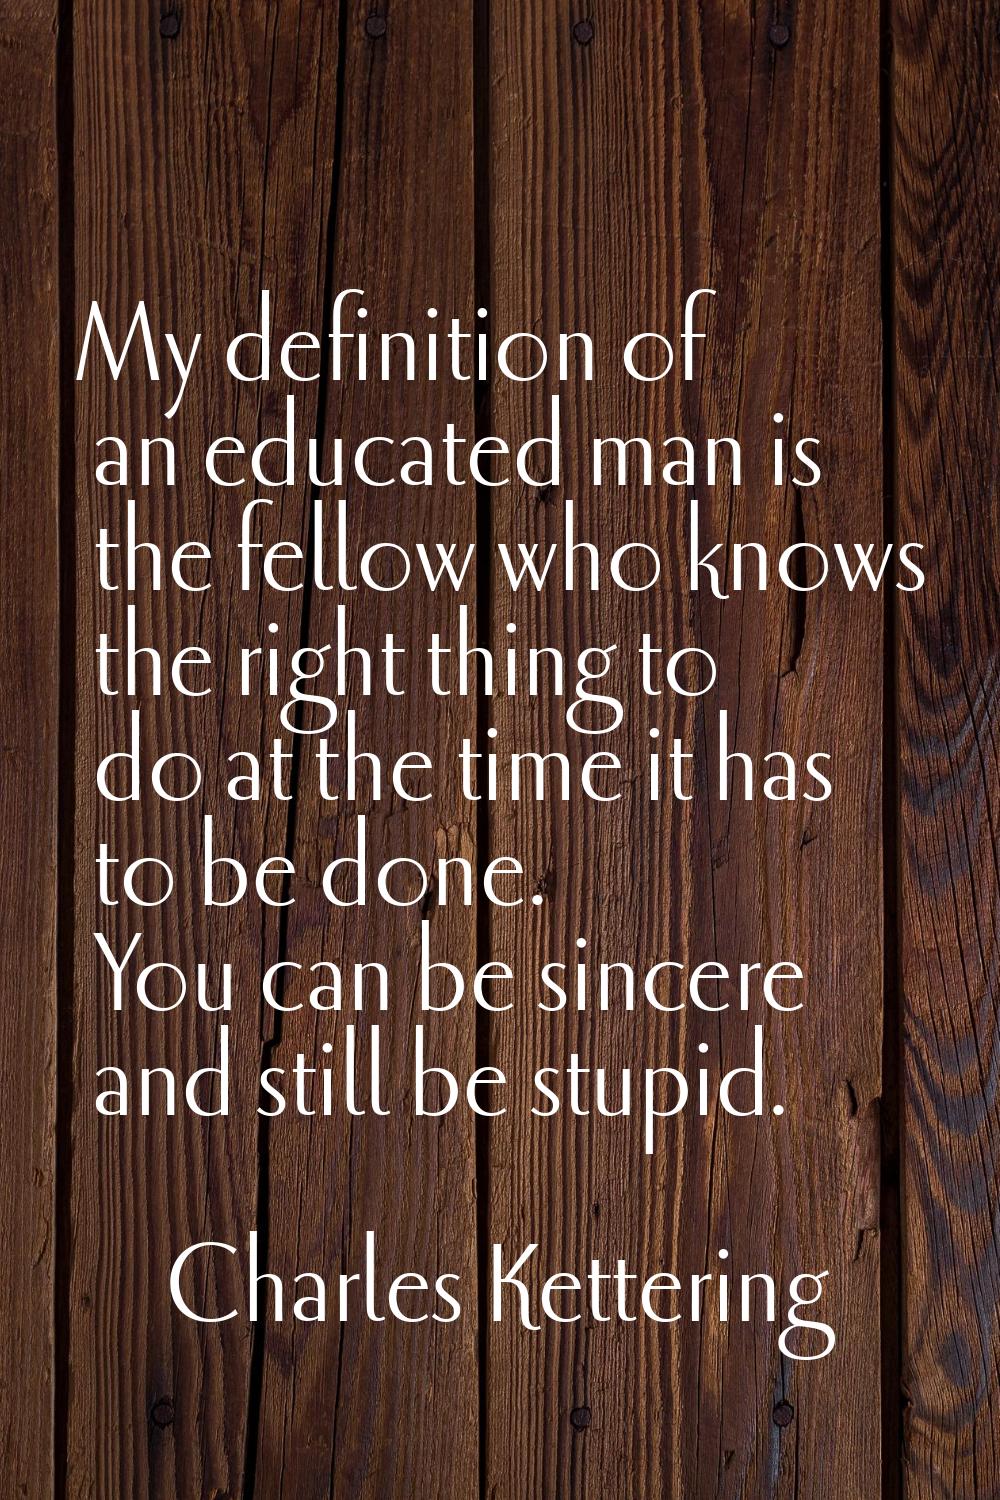 My definition of an educated man is the fellow who knows the right thing to do at the time it has t